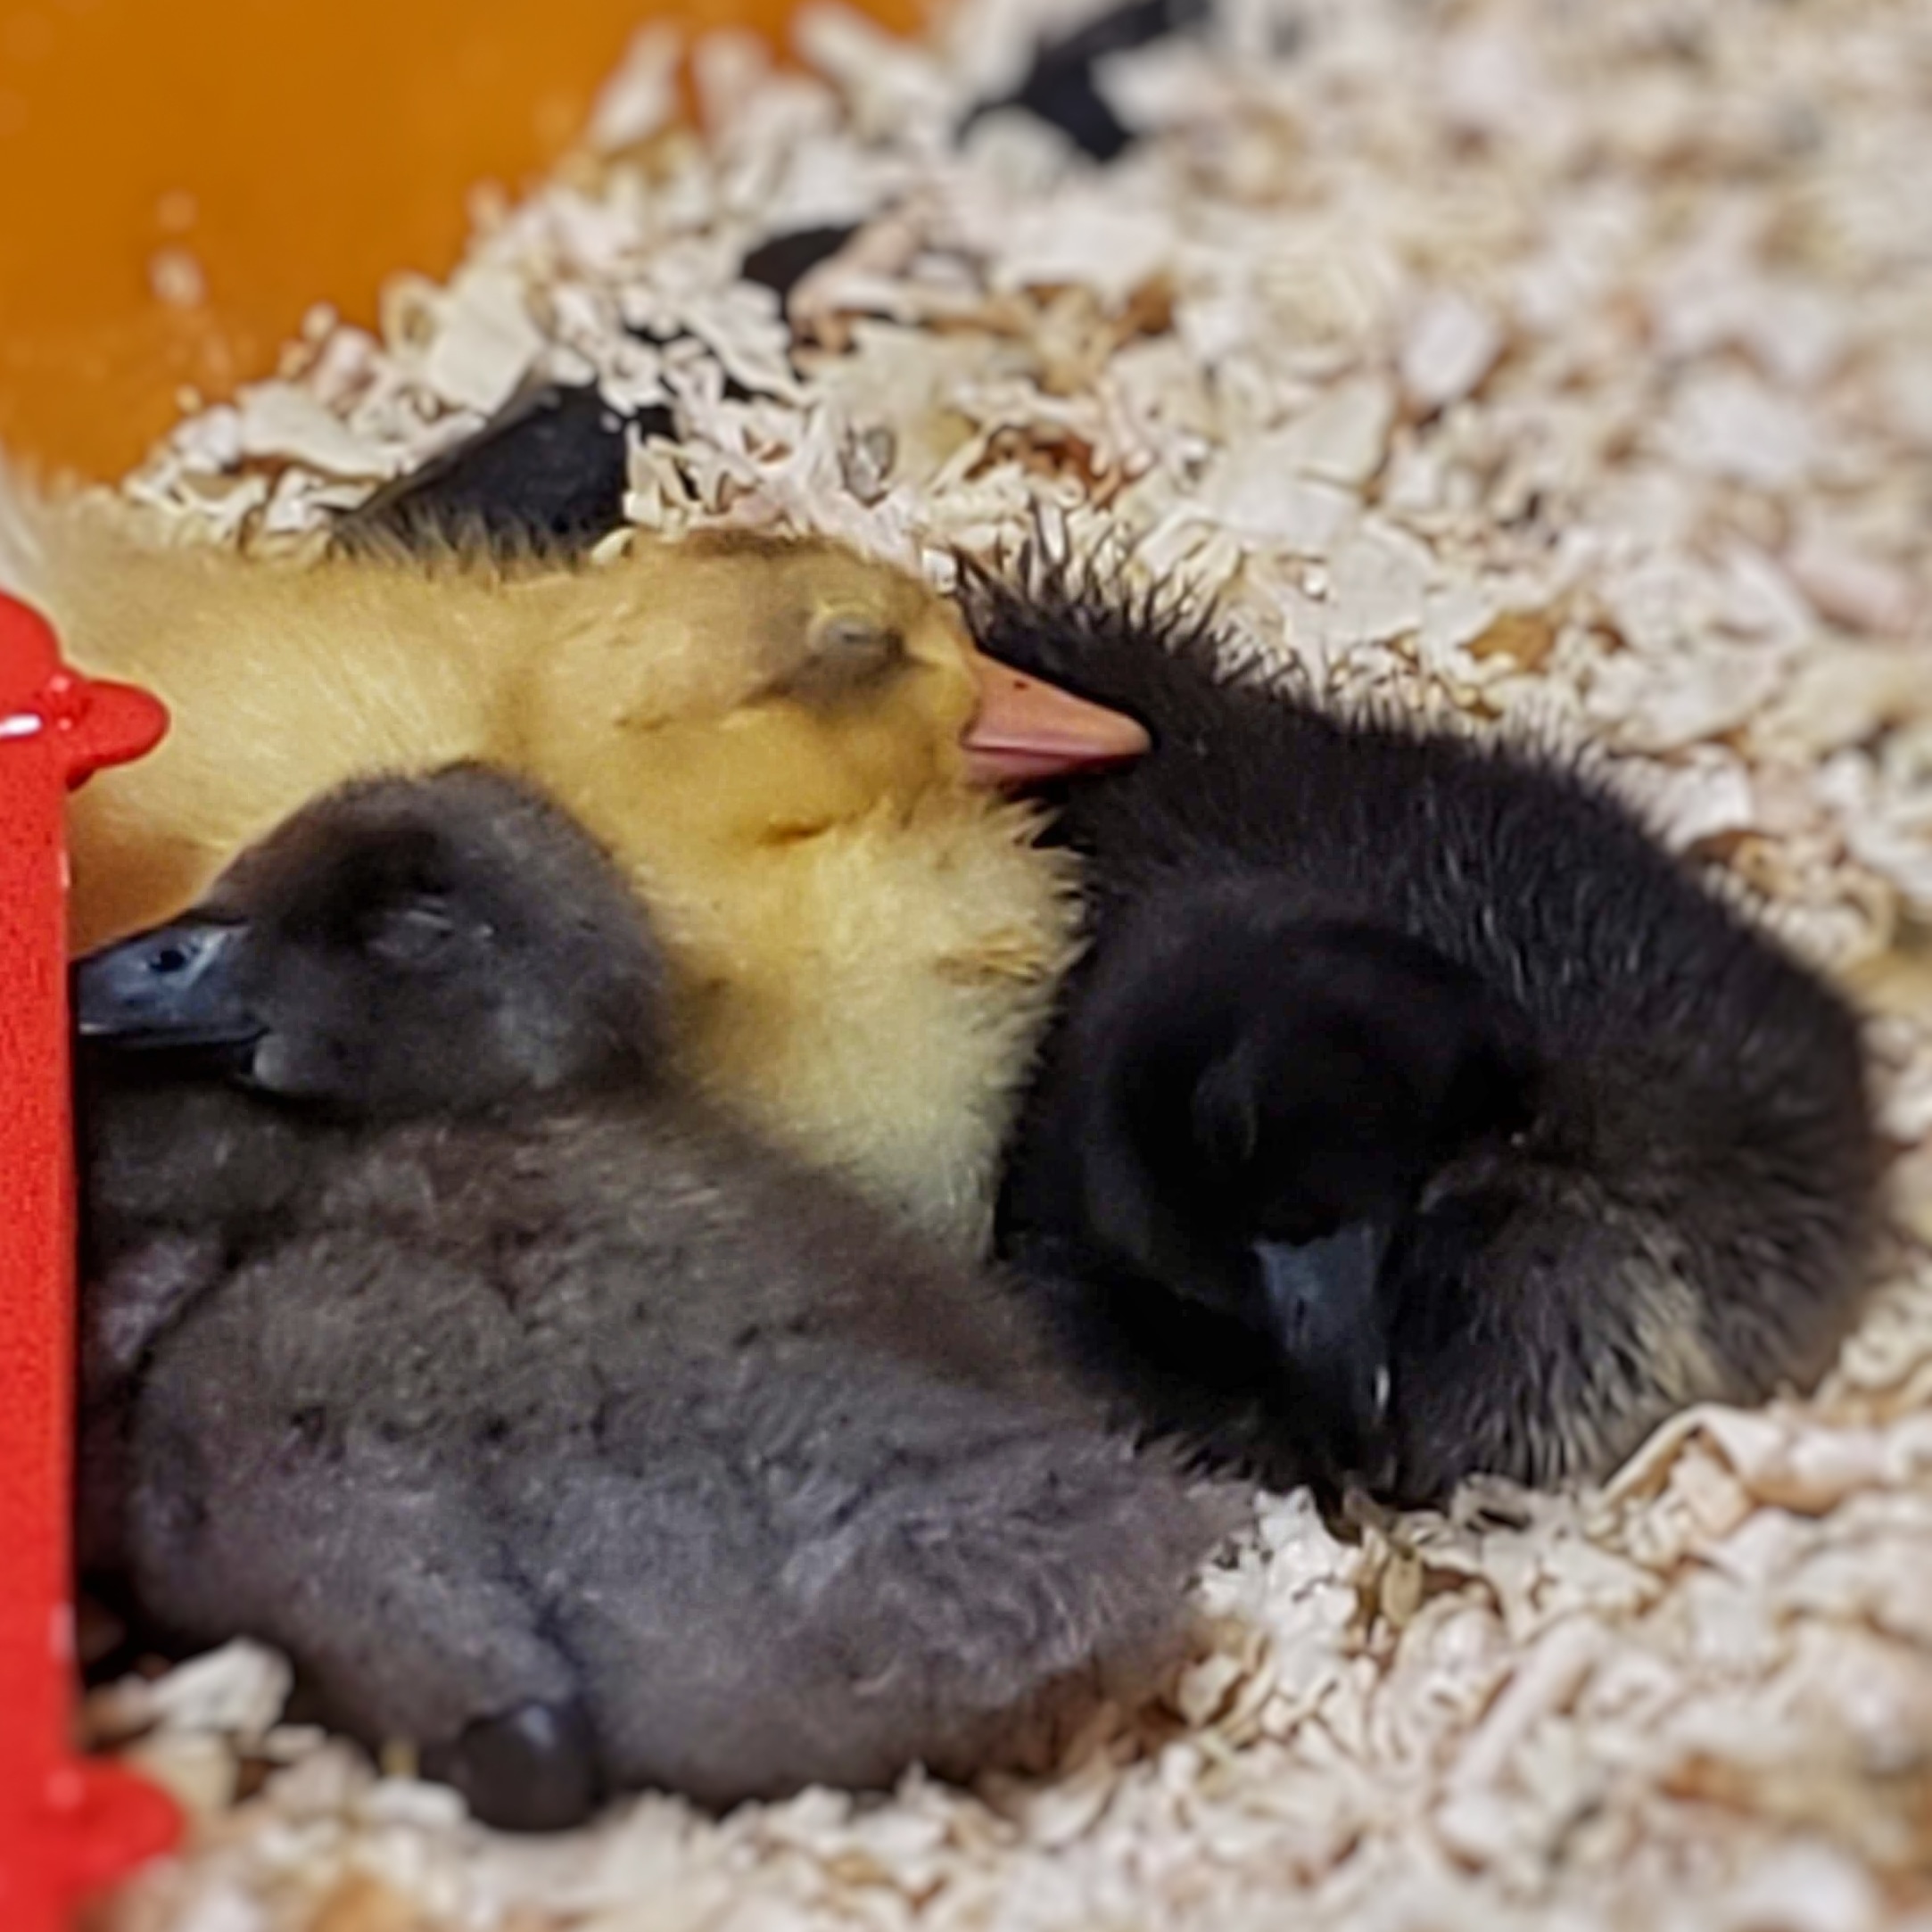 baby ducklings in a small pile, napping